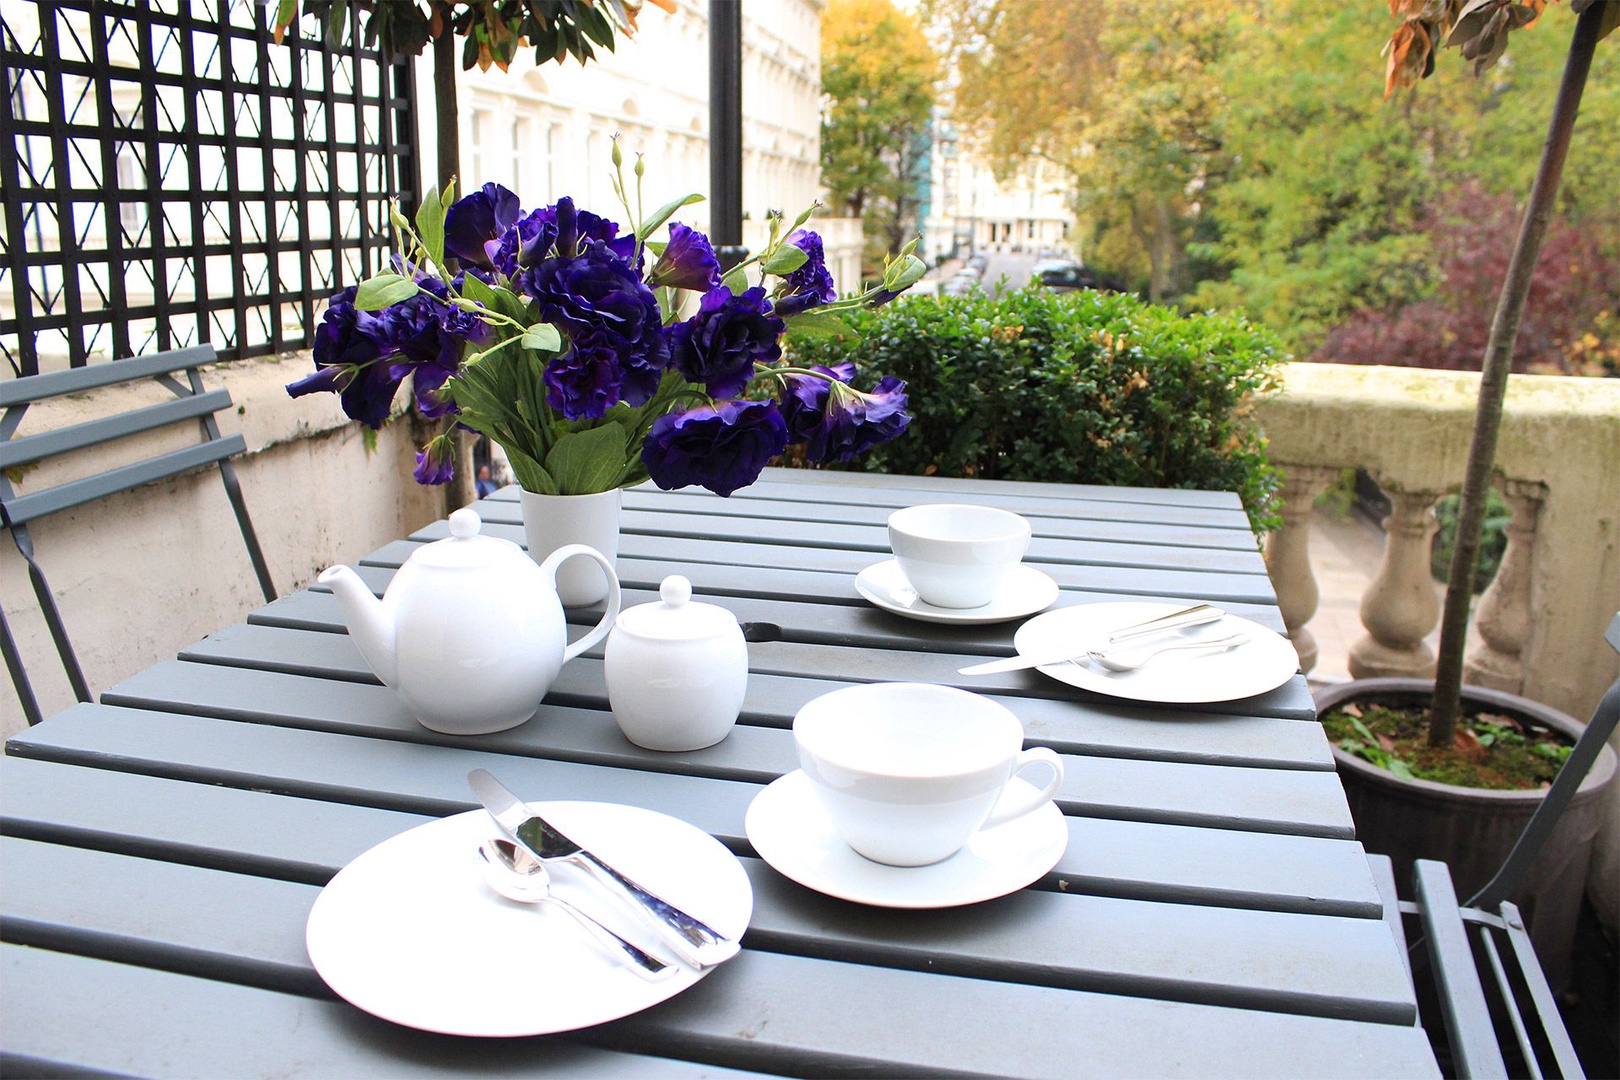 Set the balcony table for afternoon tea